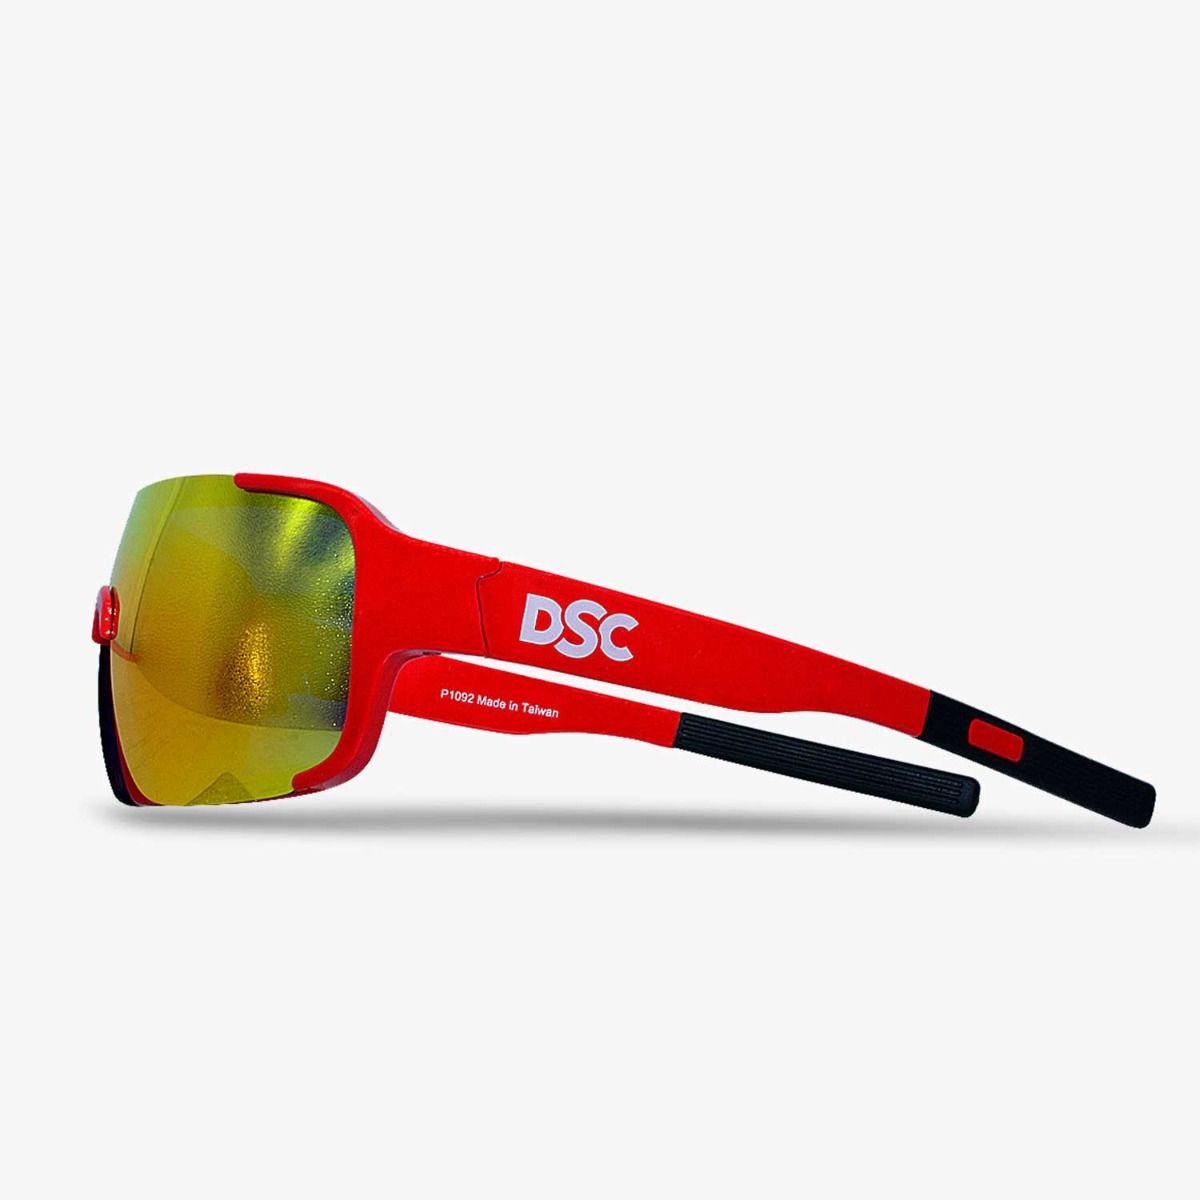 BEST CRICKET SUNGLASSES FOR PLAYERS